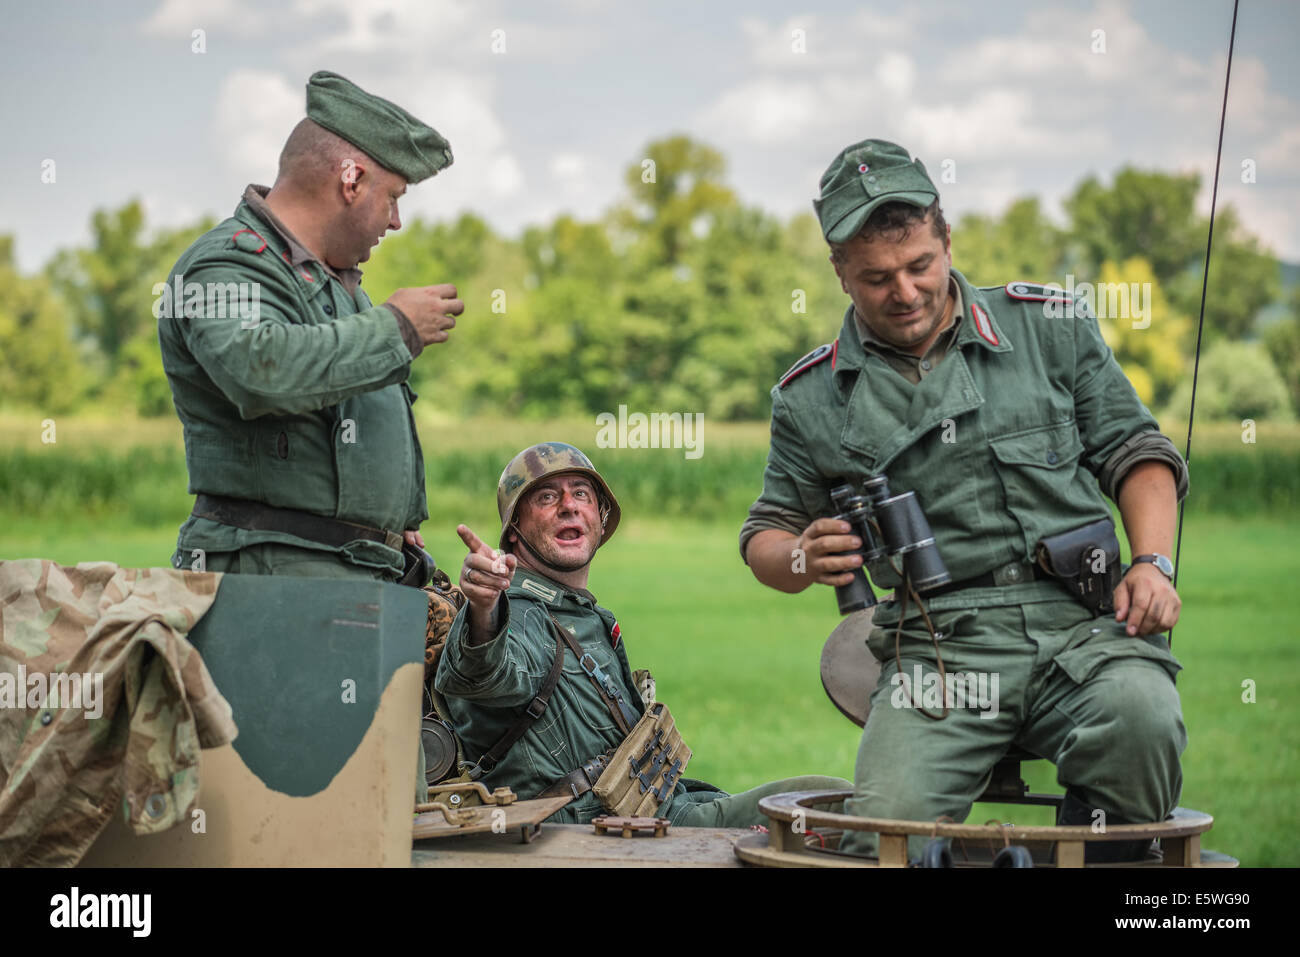 German soldier talking to comrades on a tank during reenactment of World War II fight Stock Photo